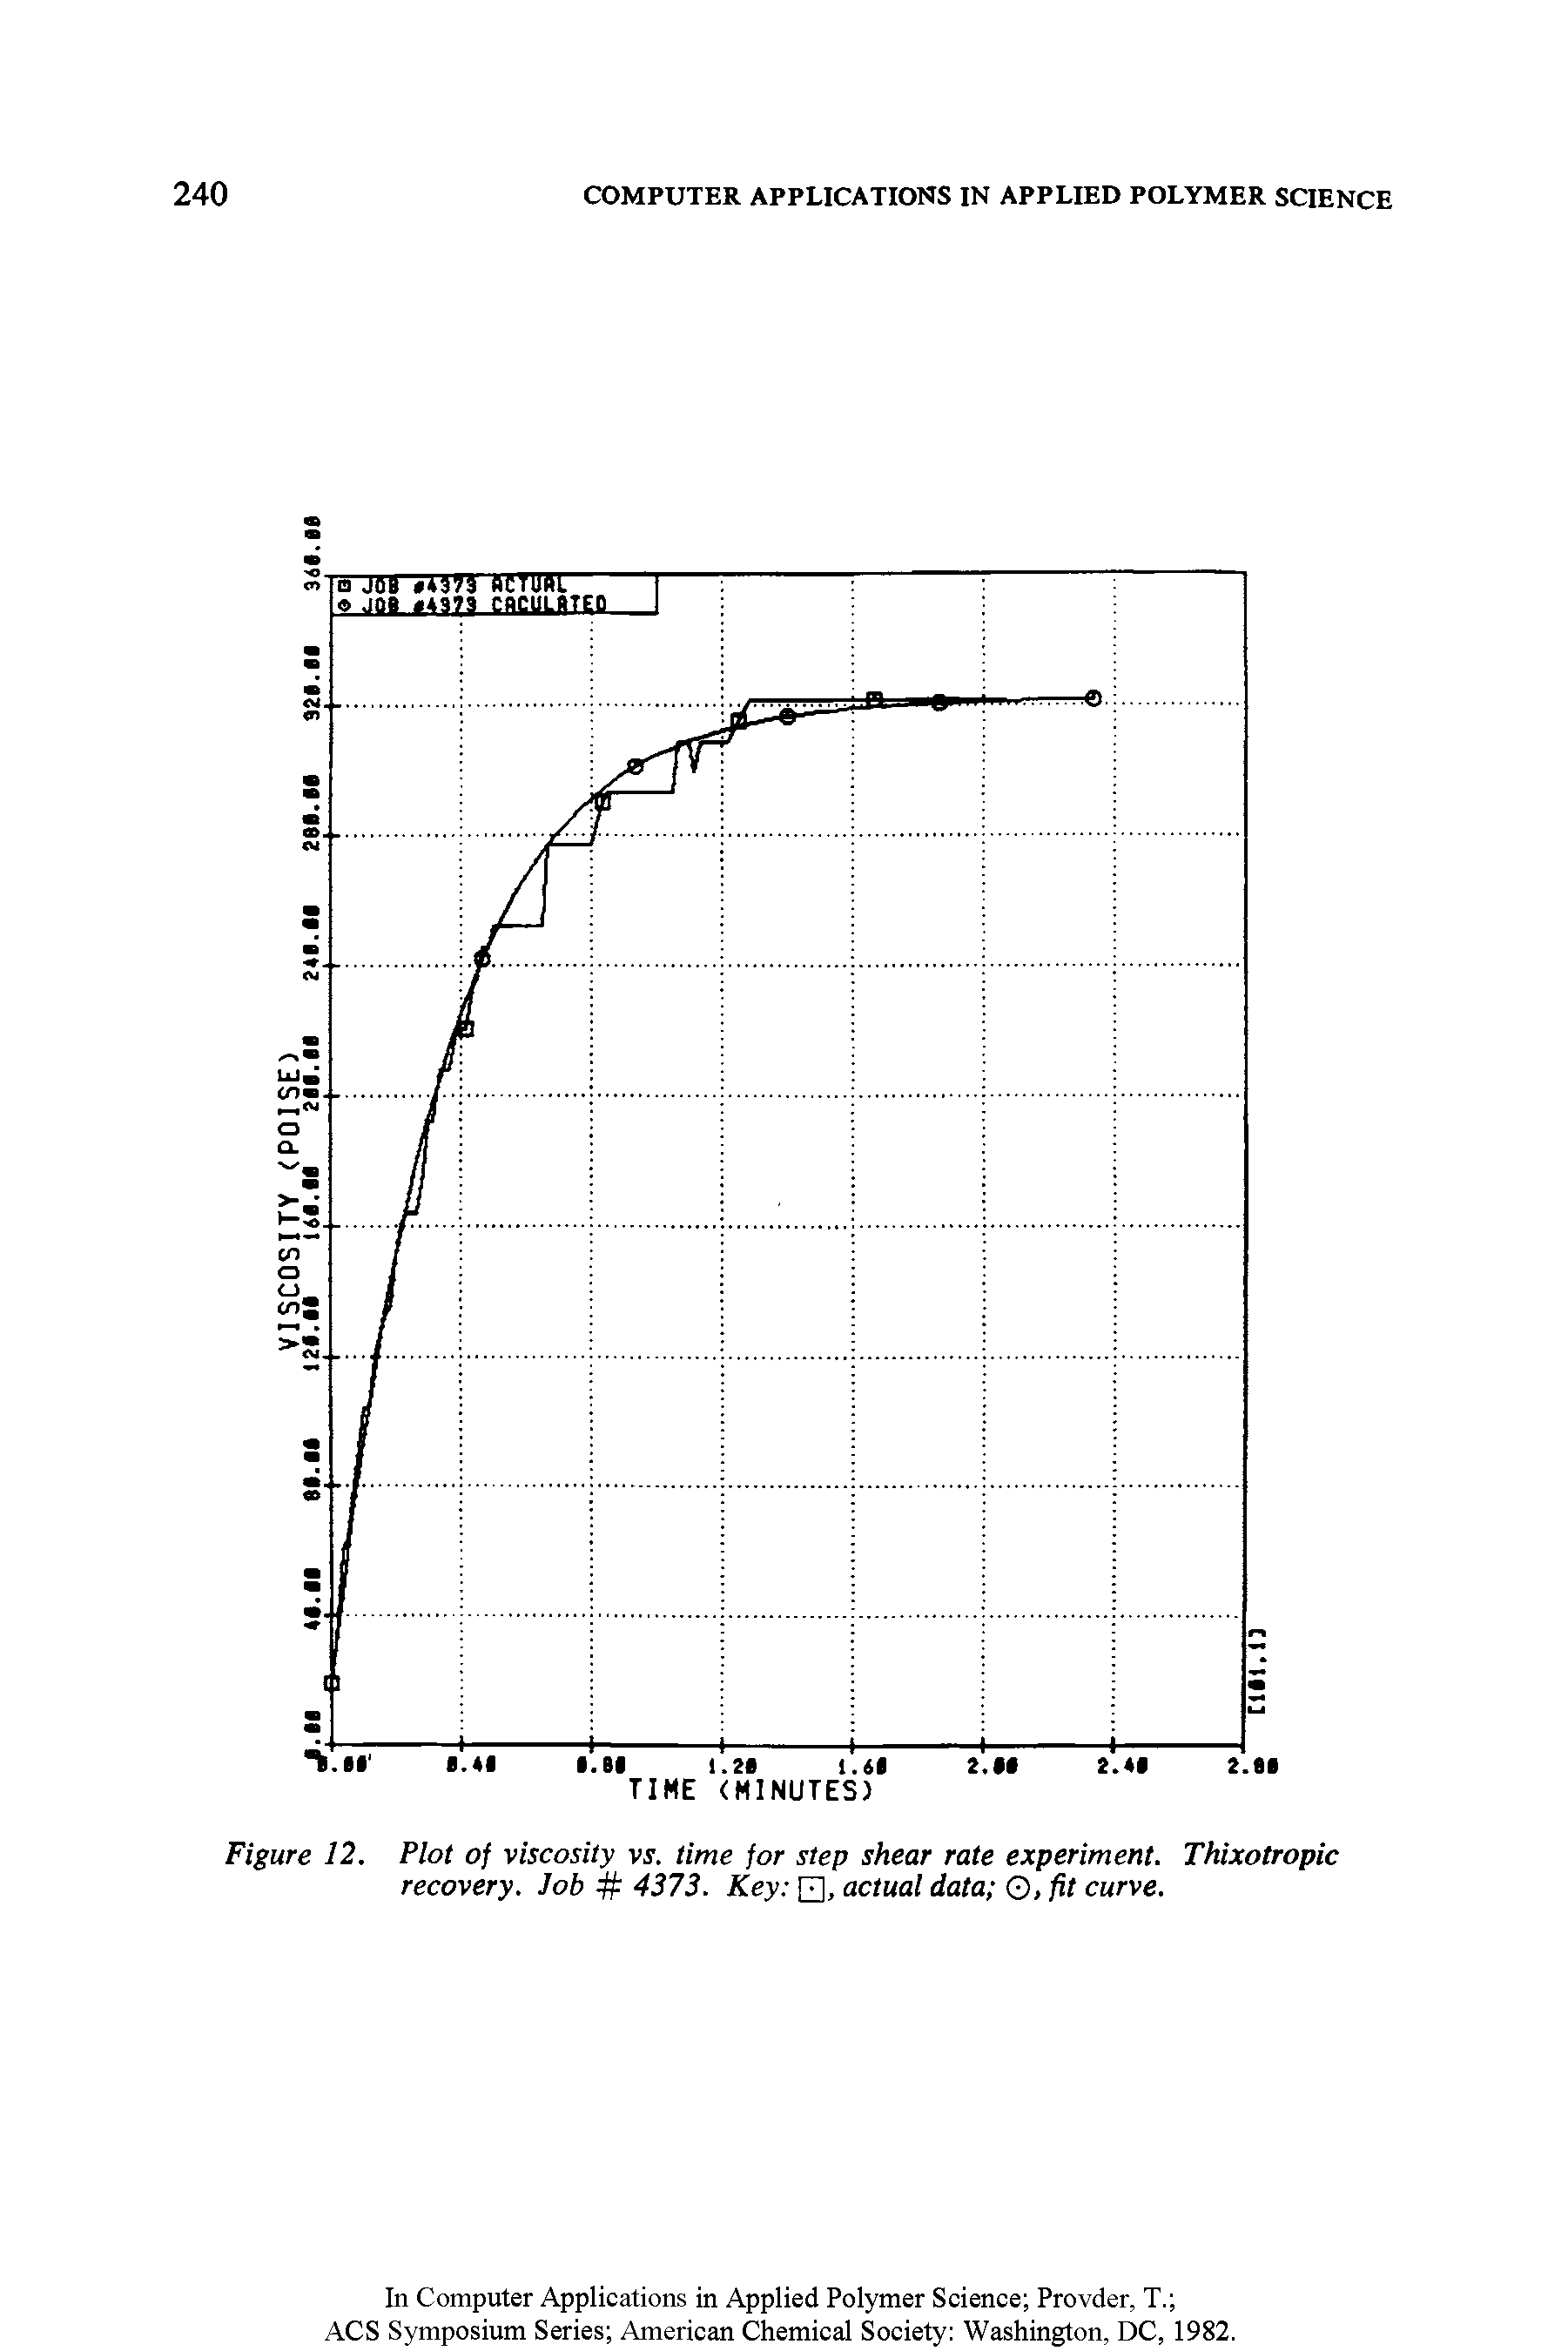 Figure 12. Plot of viscosity vs. time for step shear rate experiment. Thixotropic recovery. Job 4373. Key , actual data Q, fit curve.